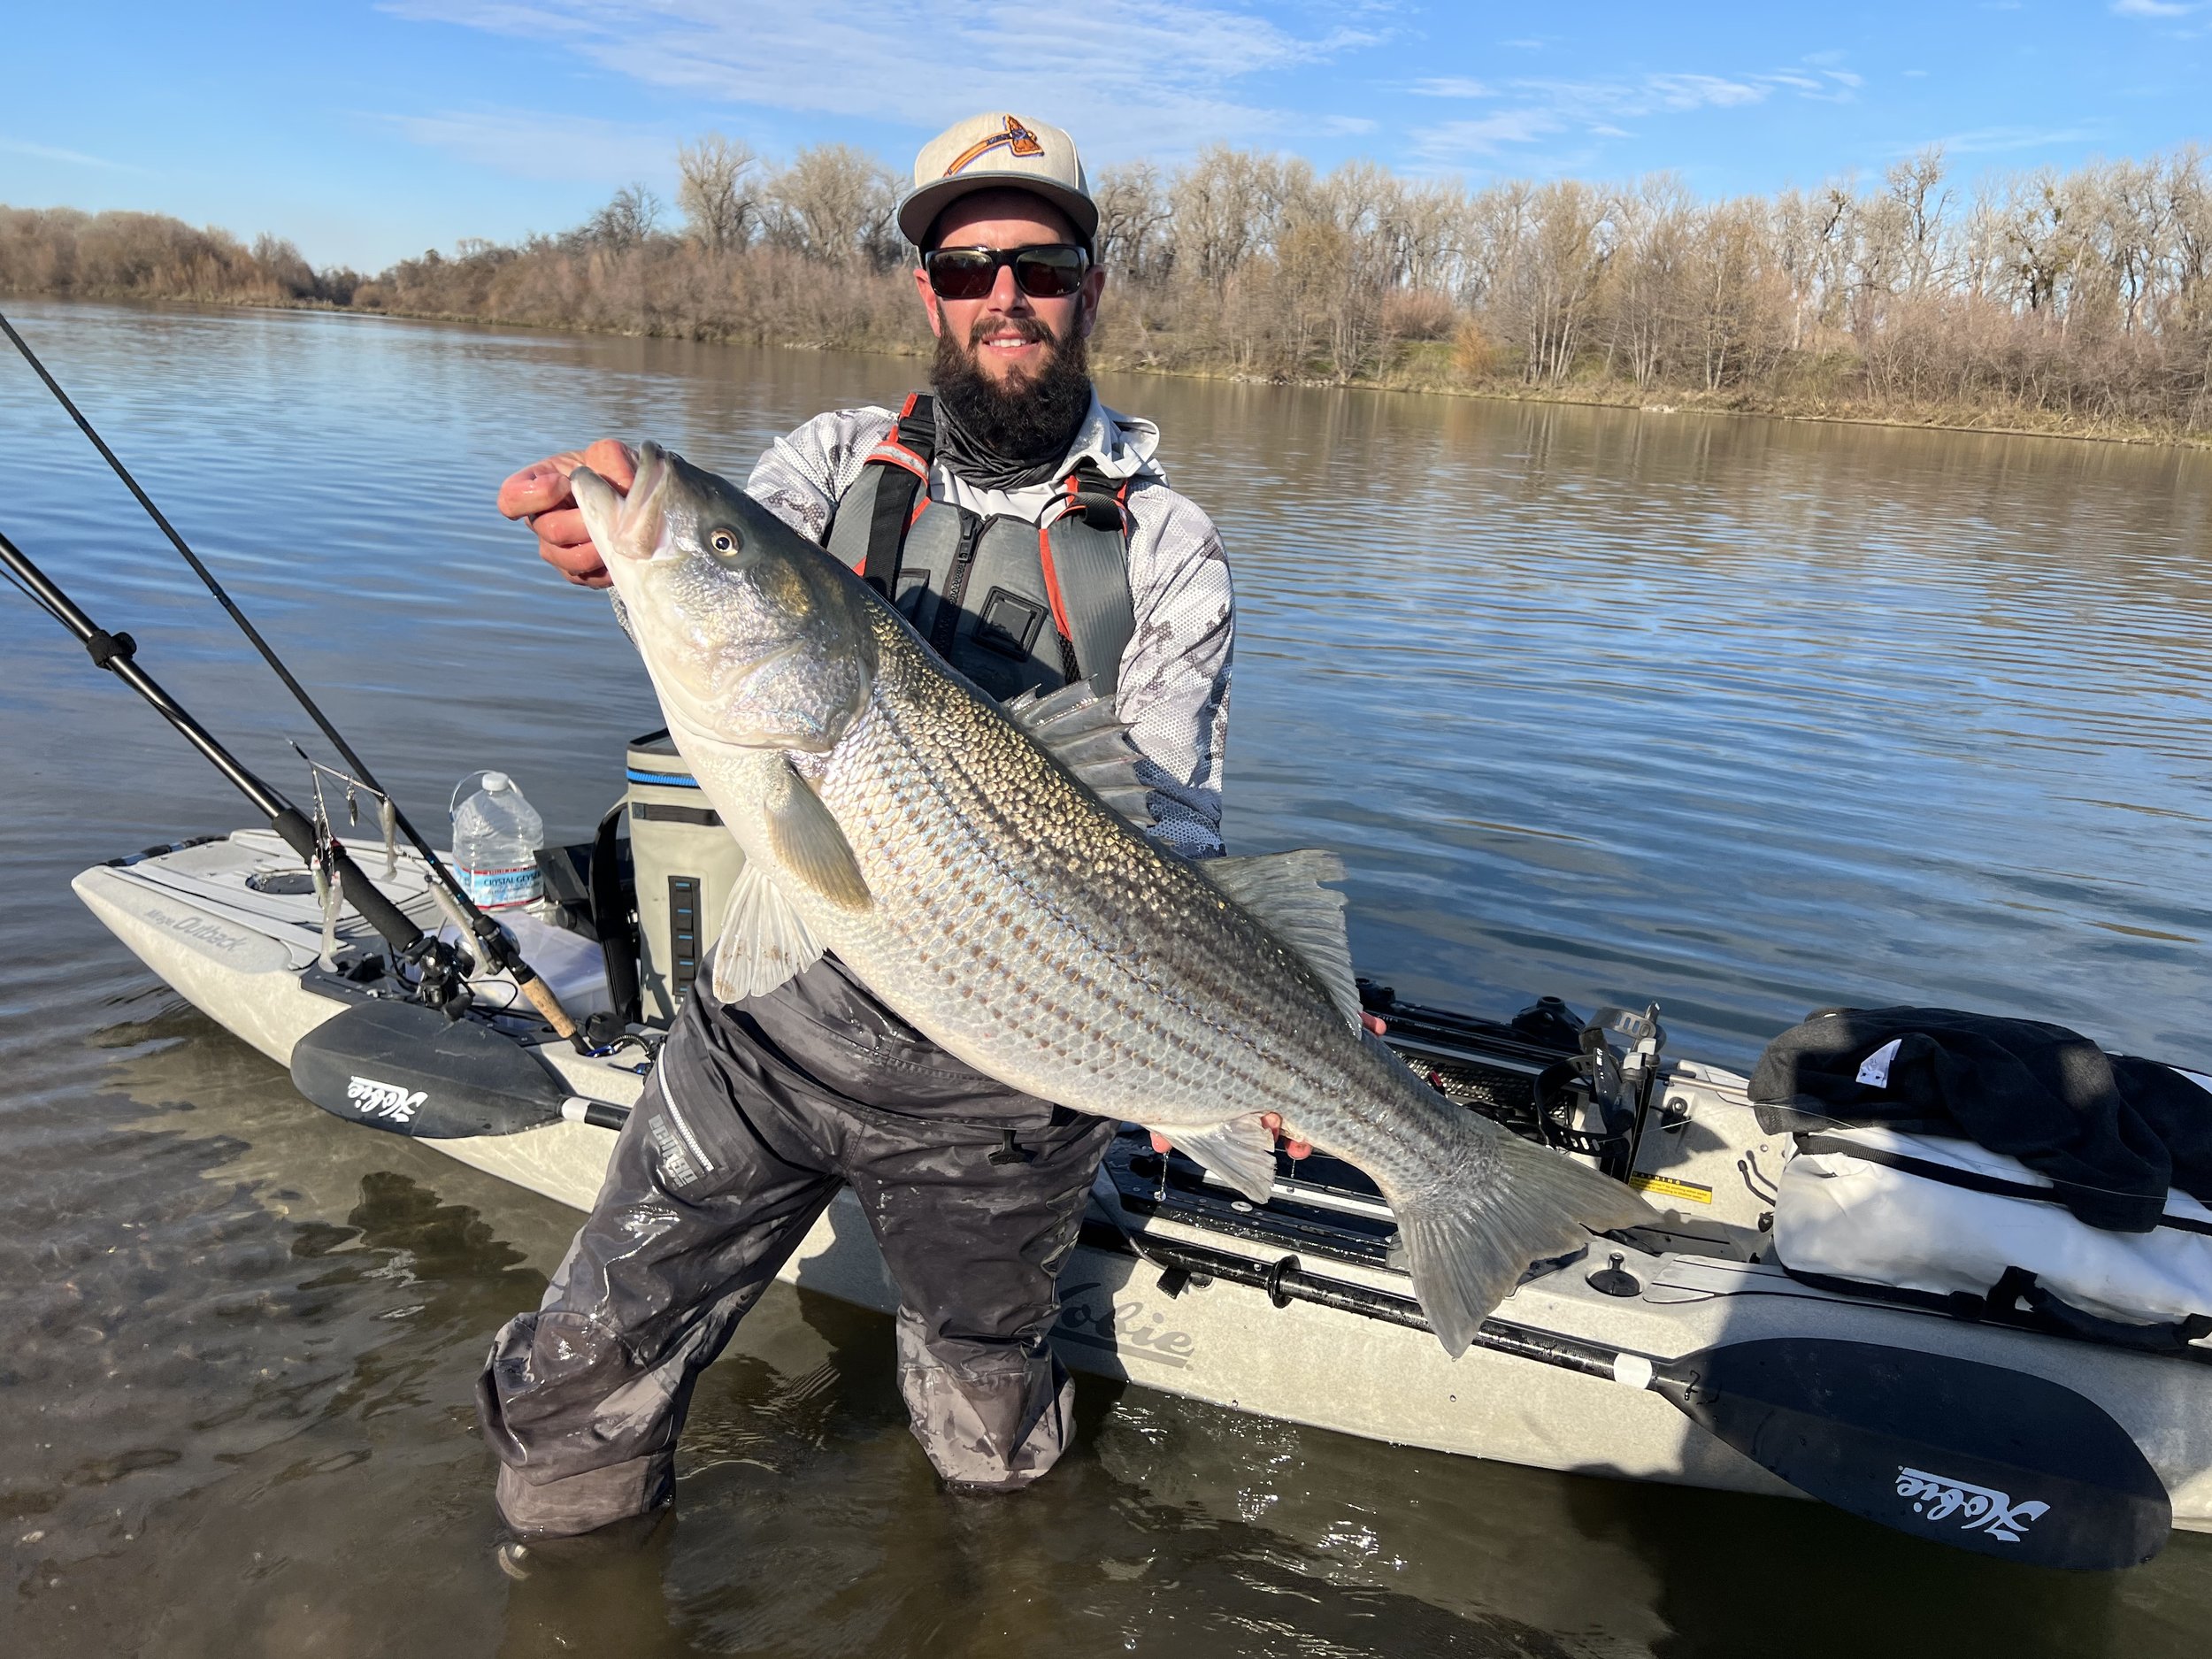 Sacramento River Trophy Striped Bass Fishing Report 2/3/22 - “Ding, Ding”